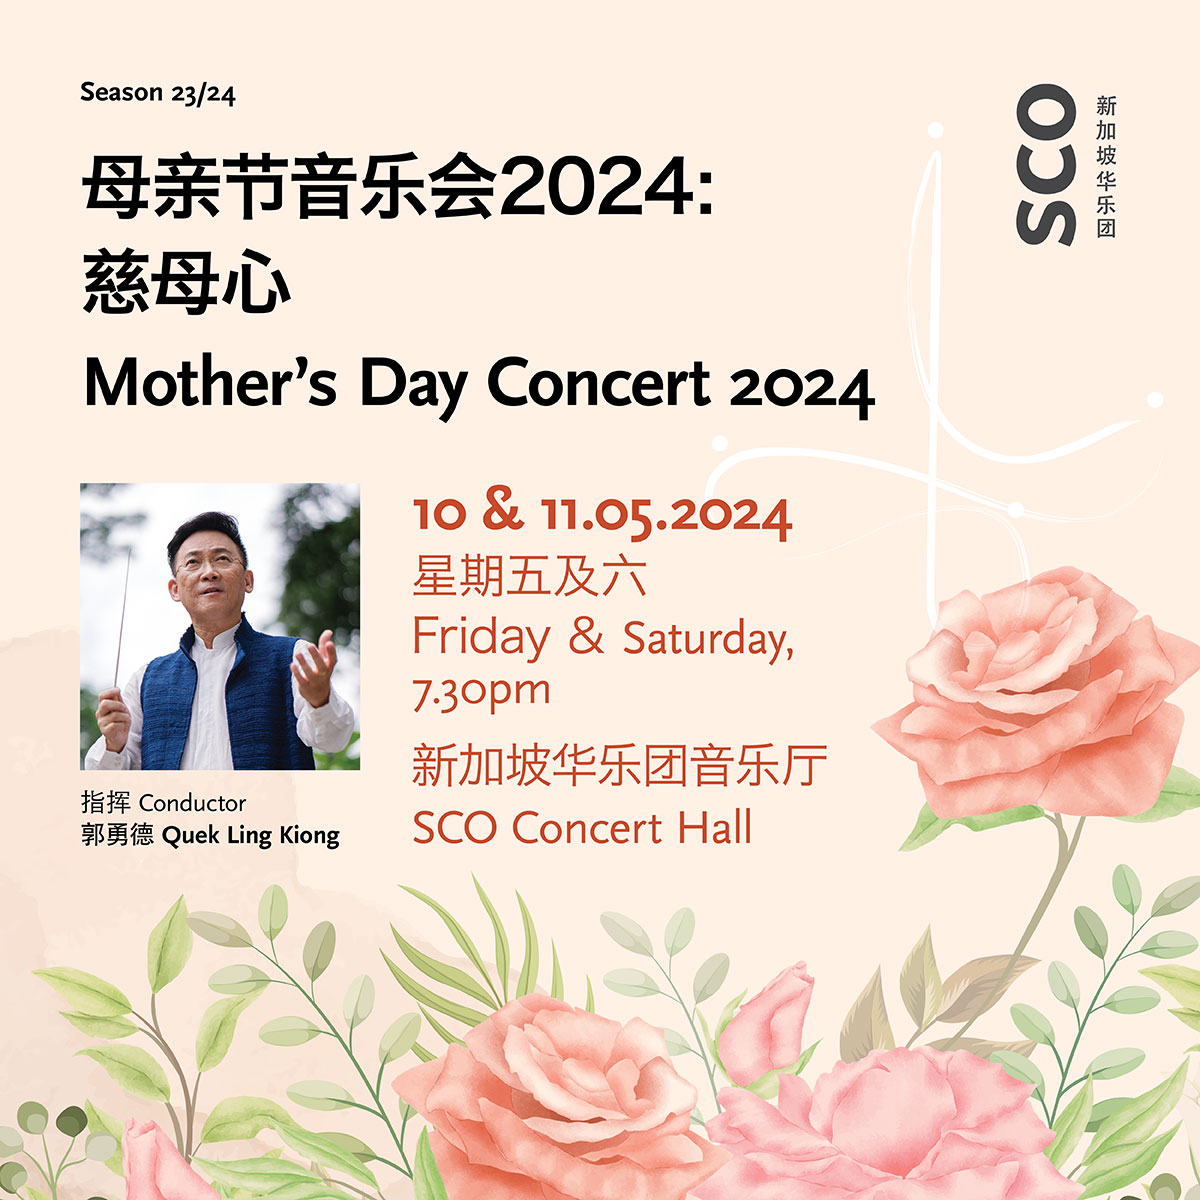 Mother’s Day Concert 2024